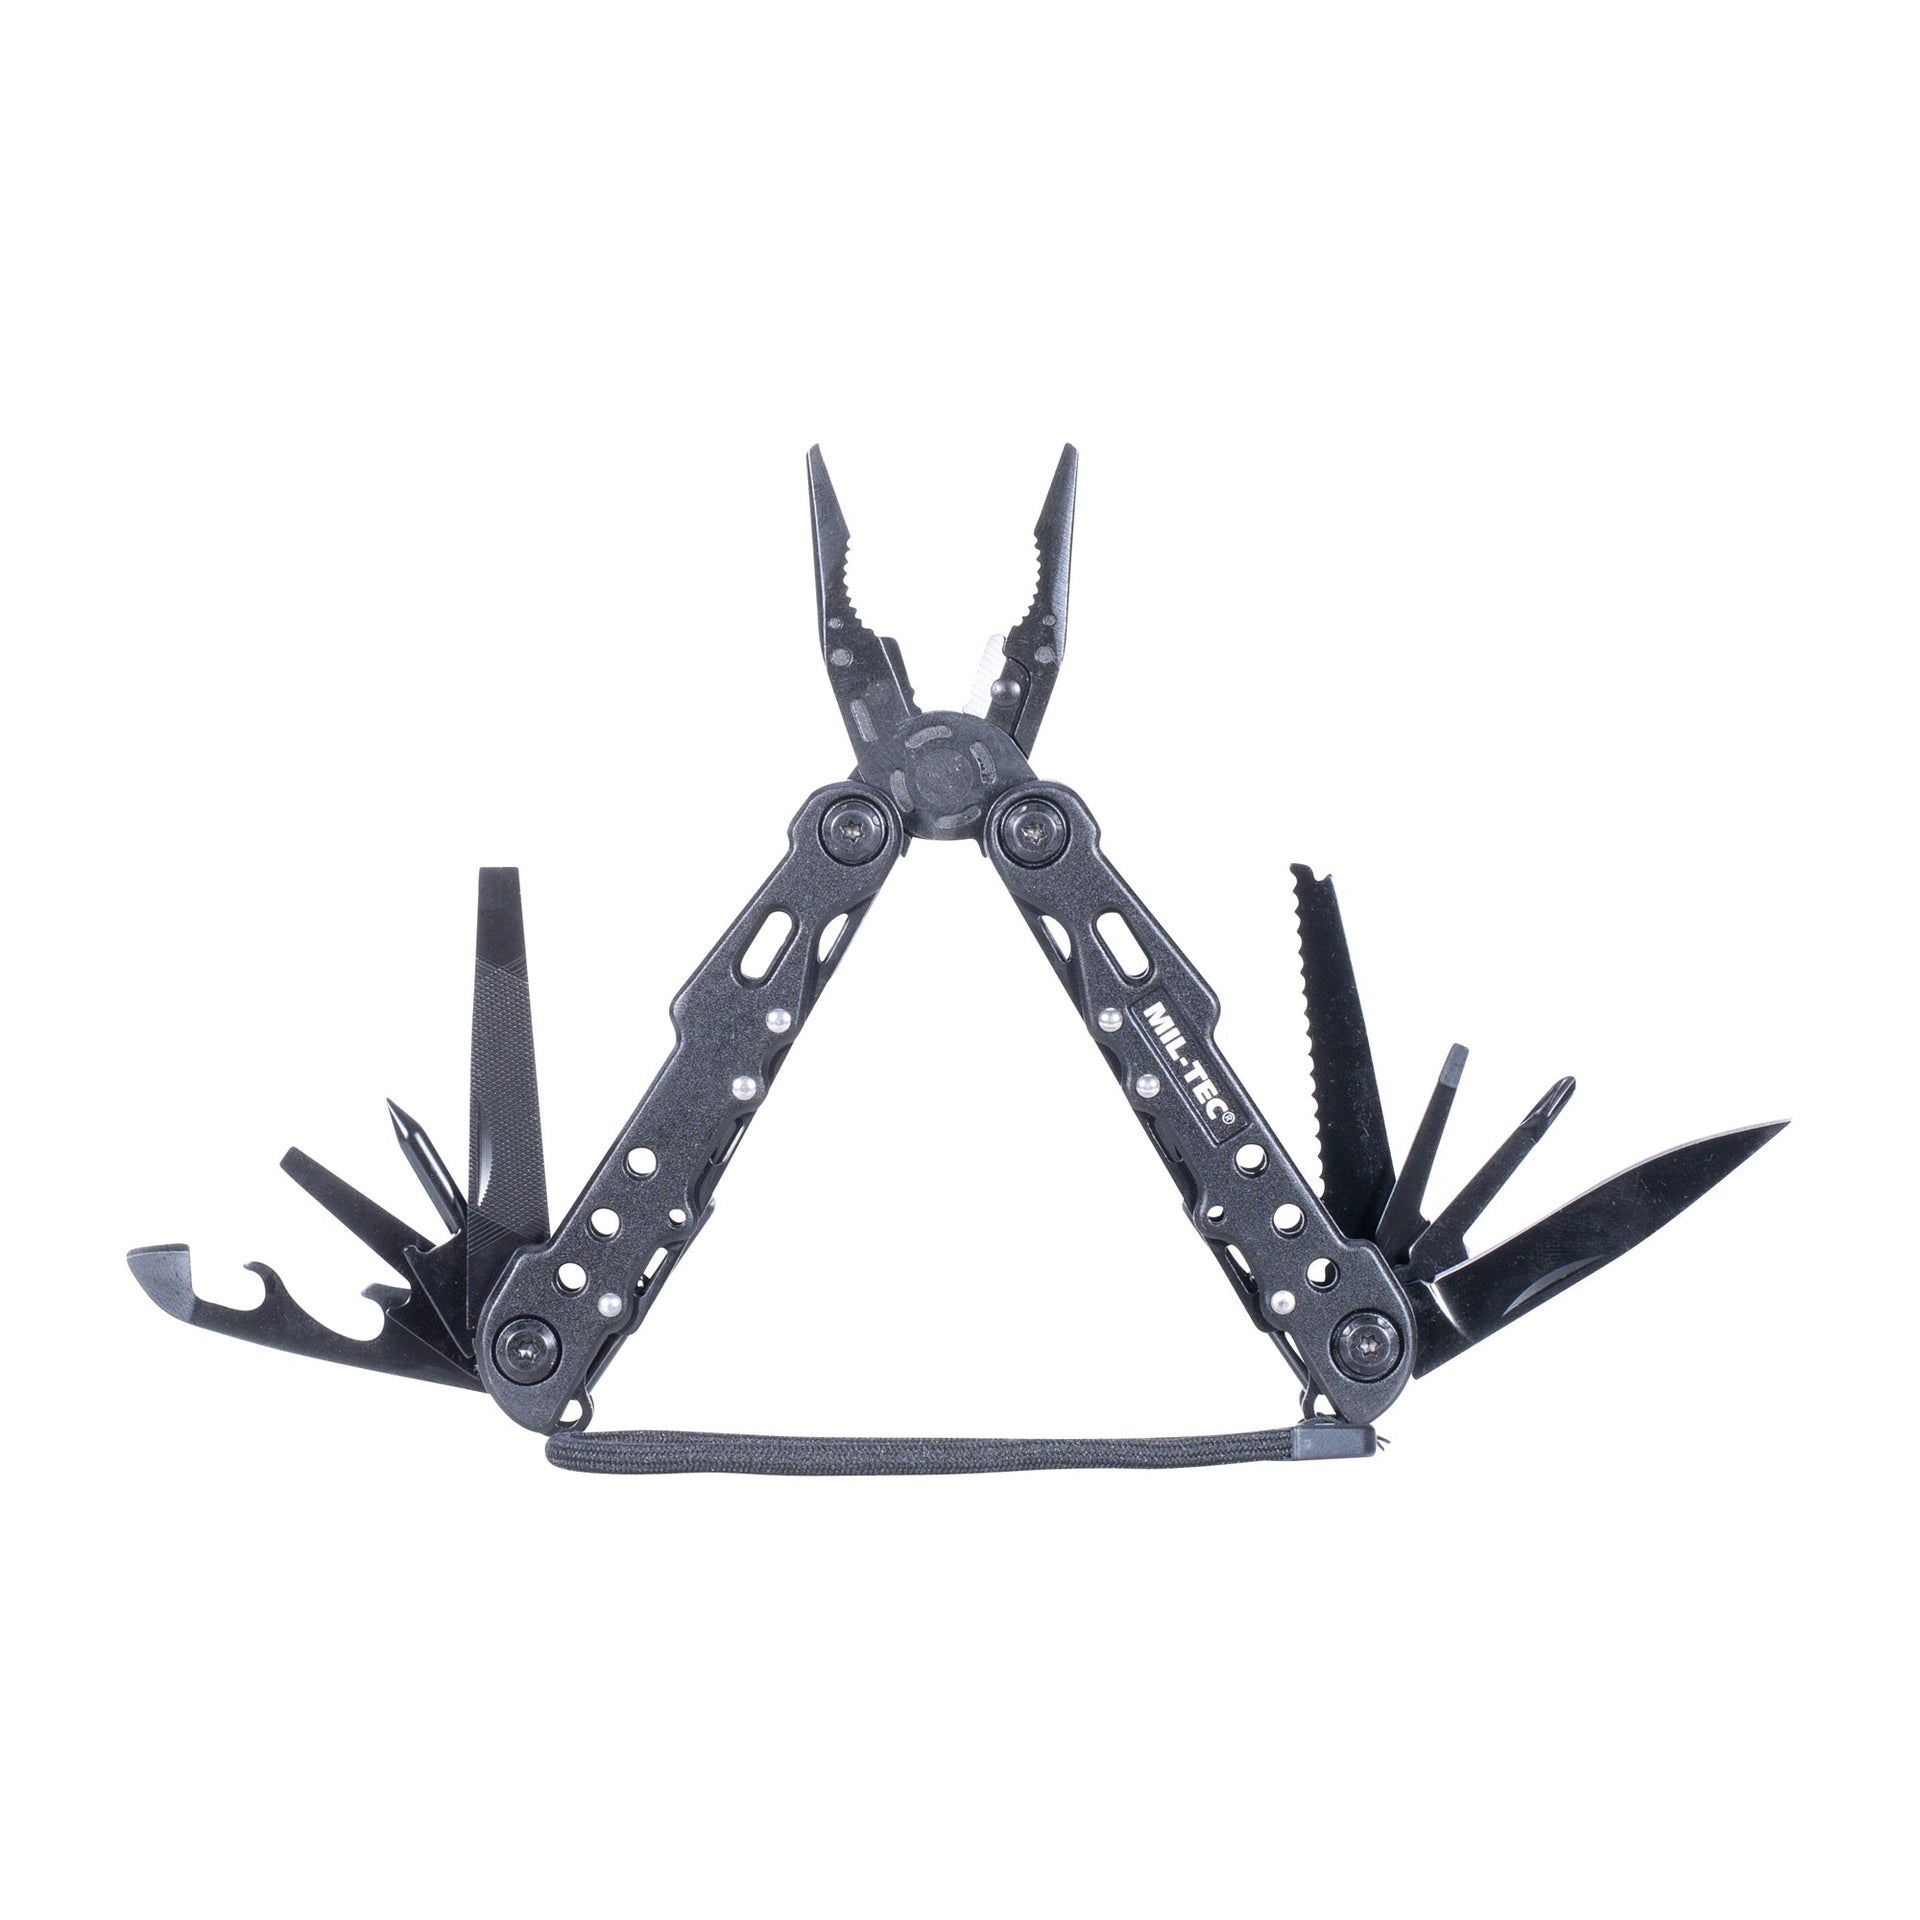 Multi-Tool Black with Pouch